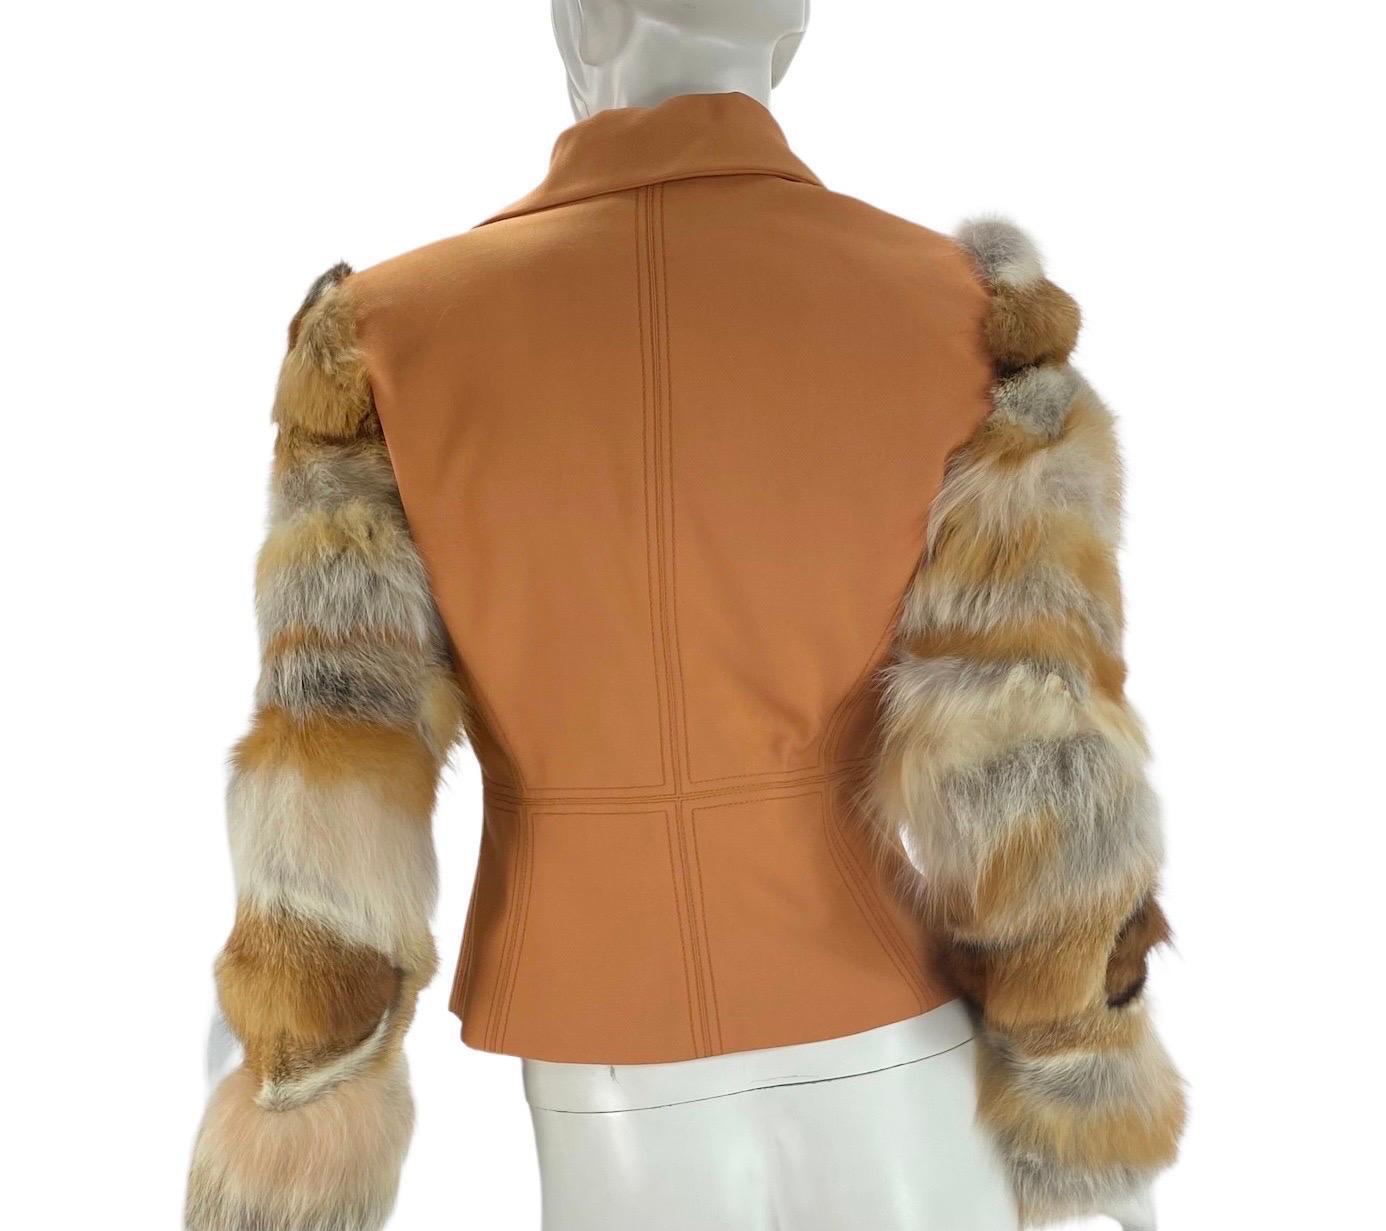 Vintage Gianni Versace Couture Orange Wool Fox Fitted Jacket
Italian size 42
Jacket with V-neck featuring pointed collar, fox fur sleeves and exposed zip closure at front.
Composition - 61 % wool, 39 % fox. Medusa signature lining. Peplum